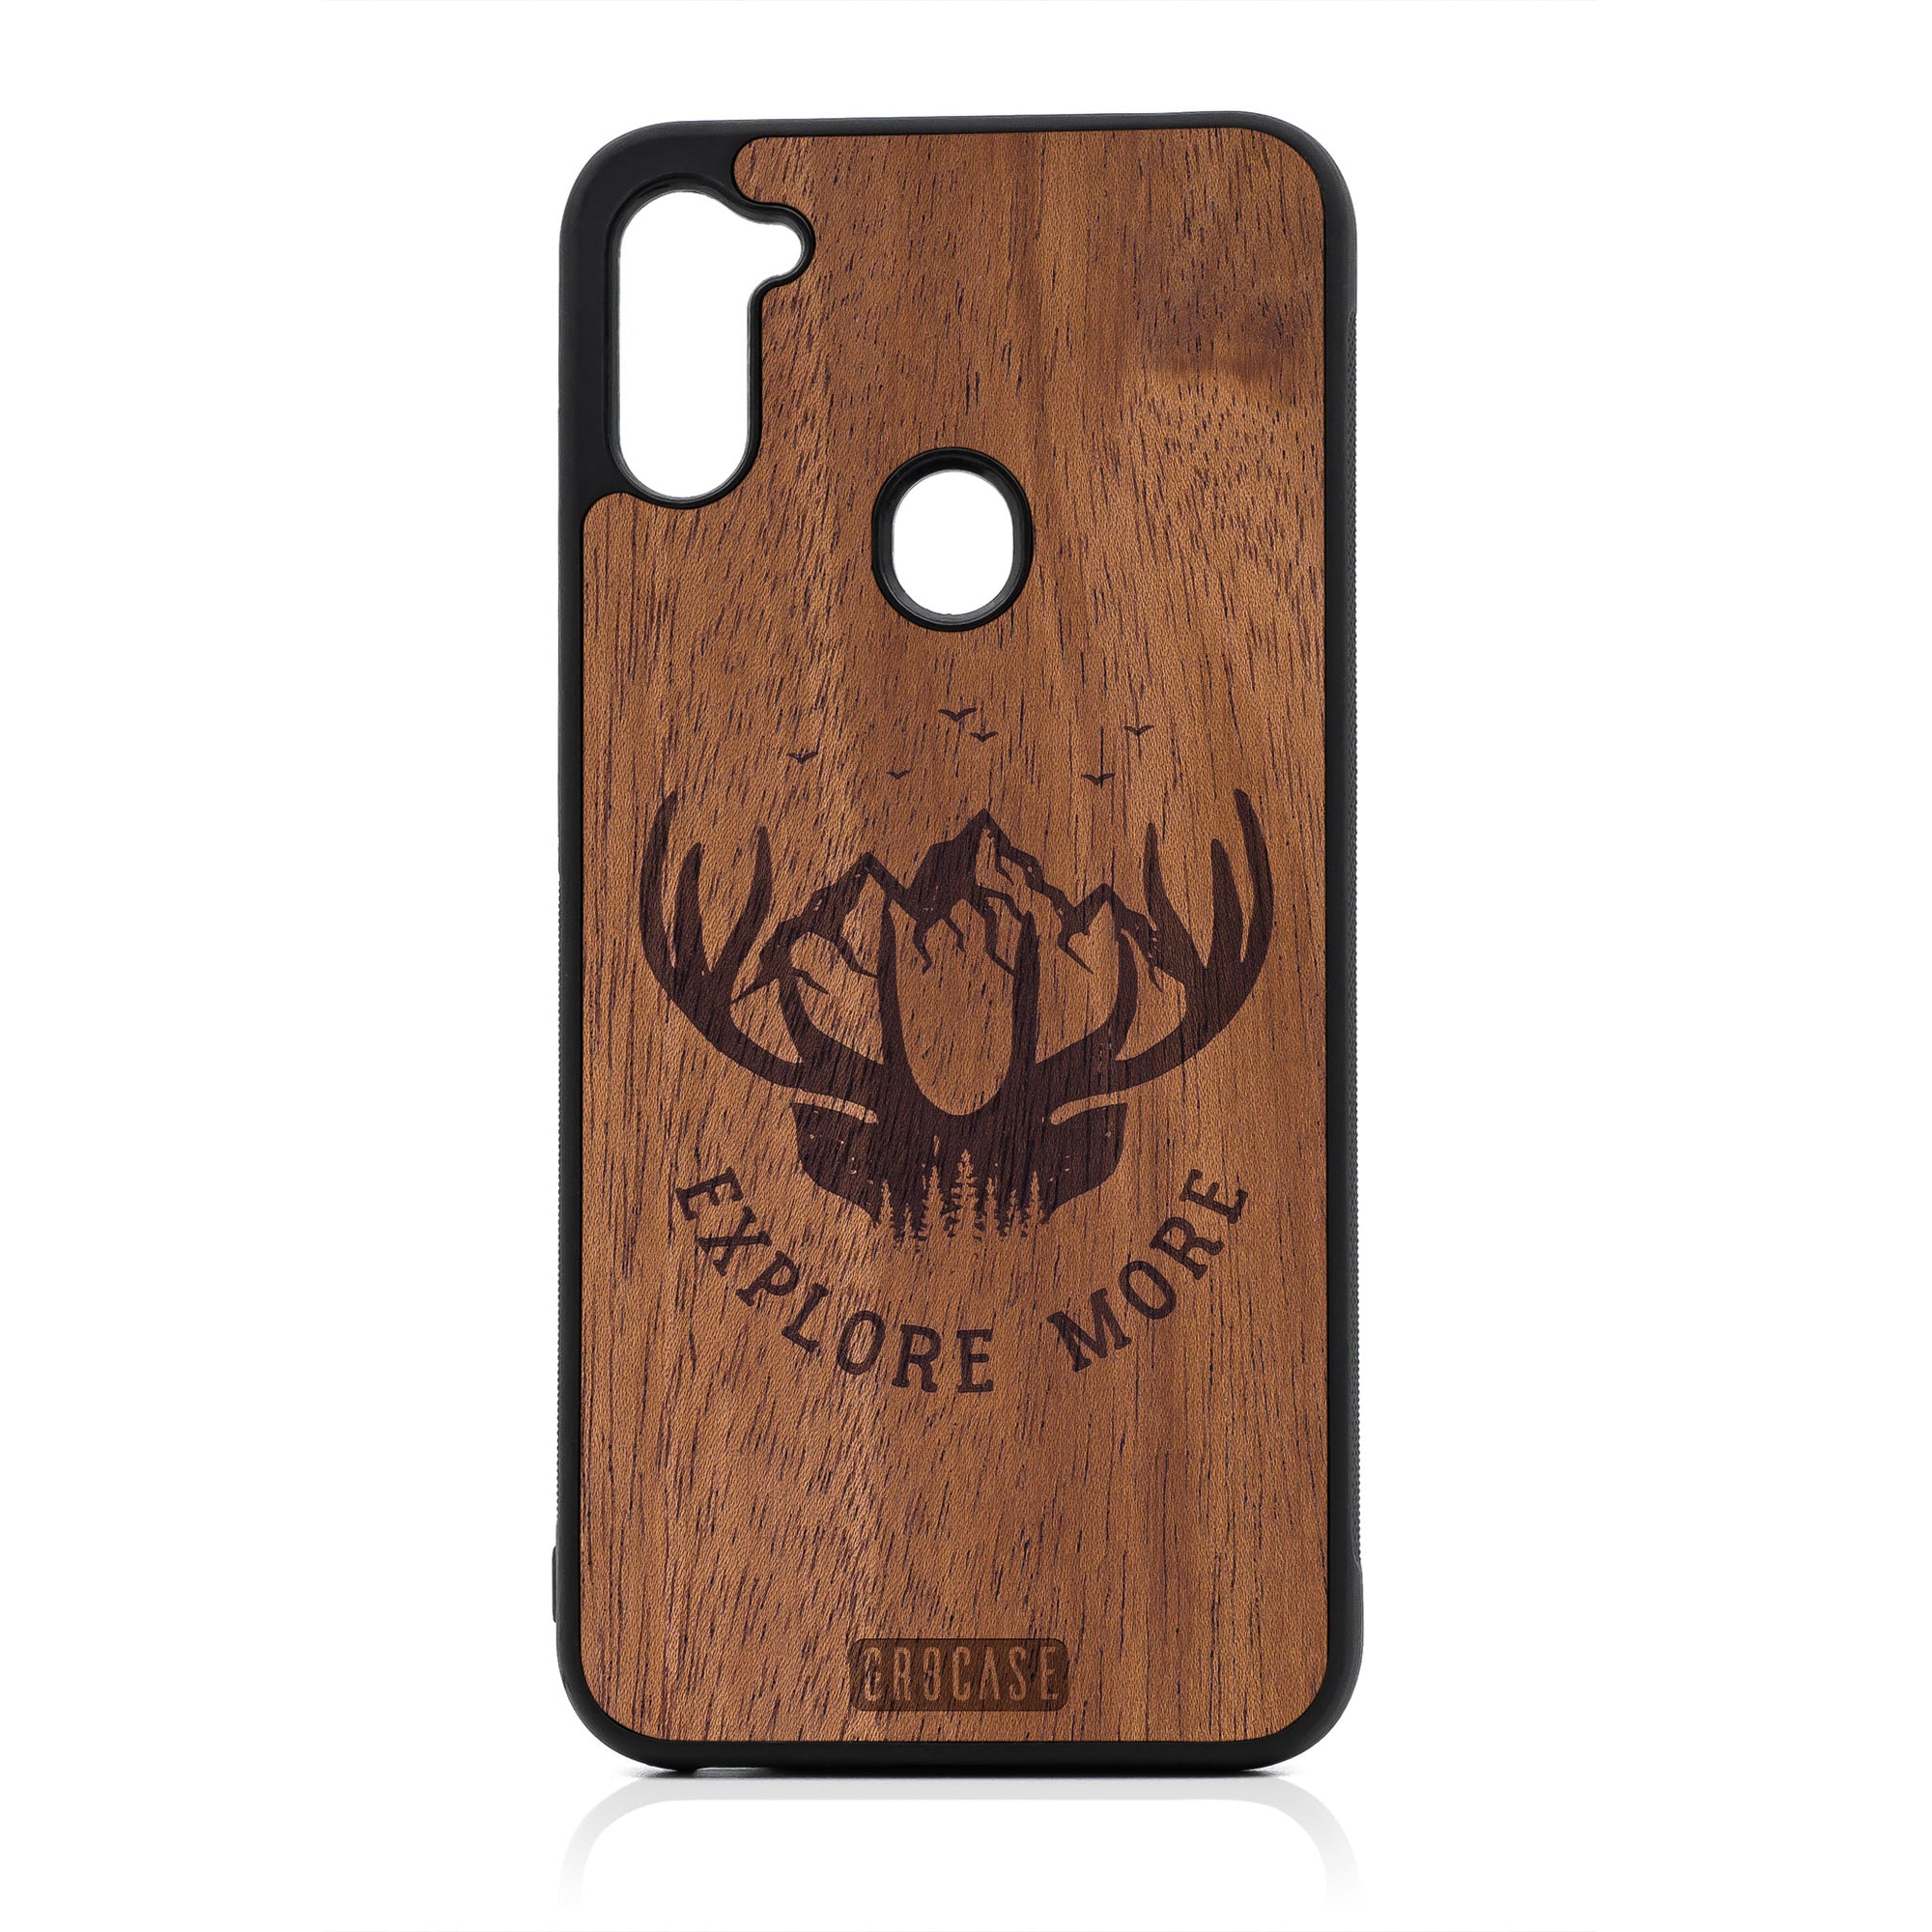 Explore More (Forest, Mountain & Antlers) Design Wood Case For Samsung Galaxy A11